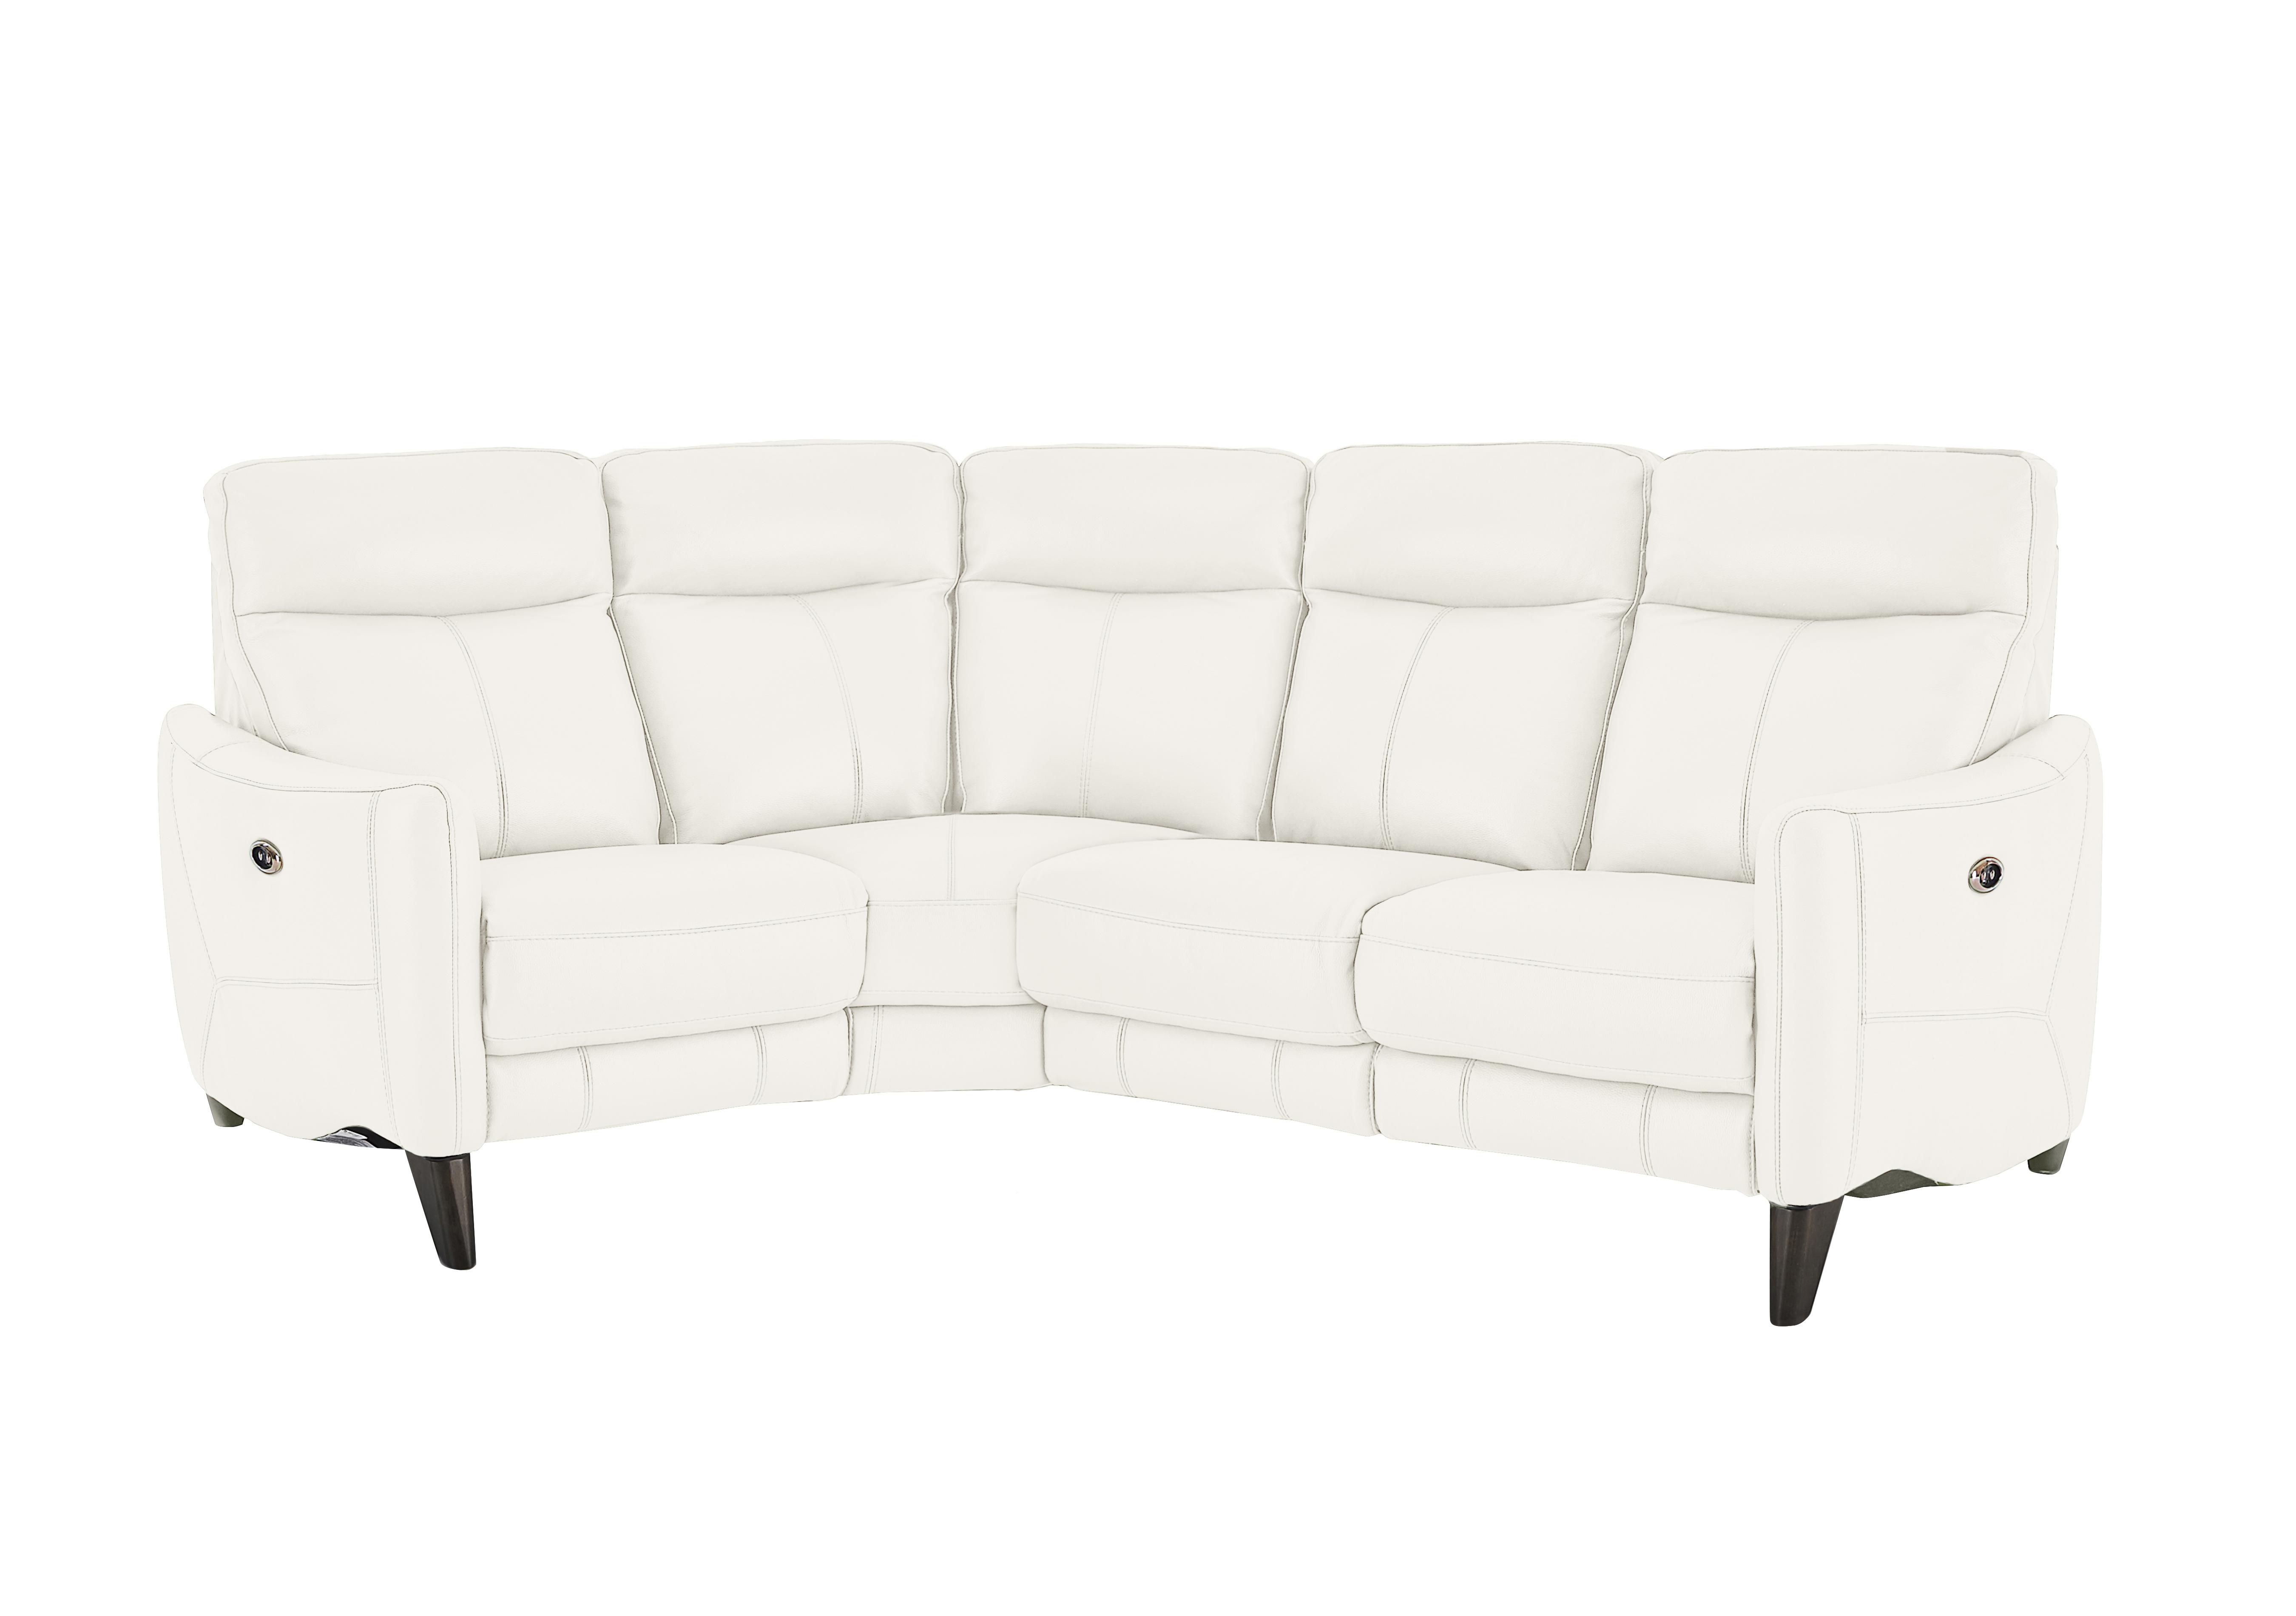 Compact Collection Petit Leather Corner Sofa in Bv-744d Star White on Furniture Village